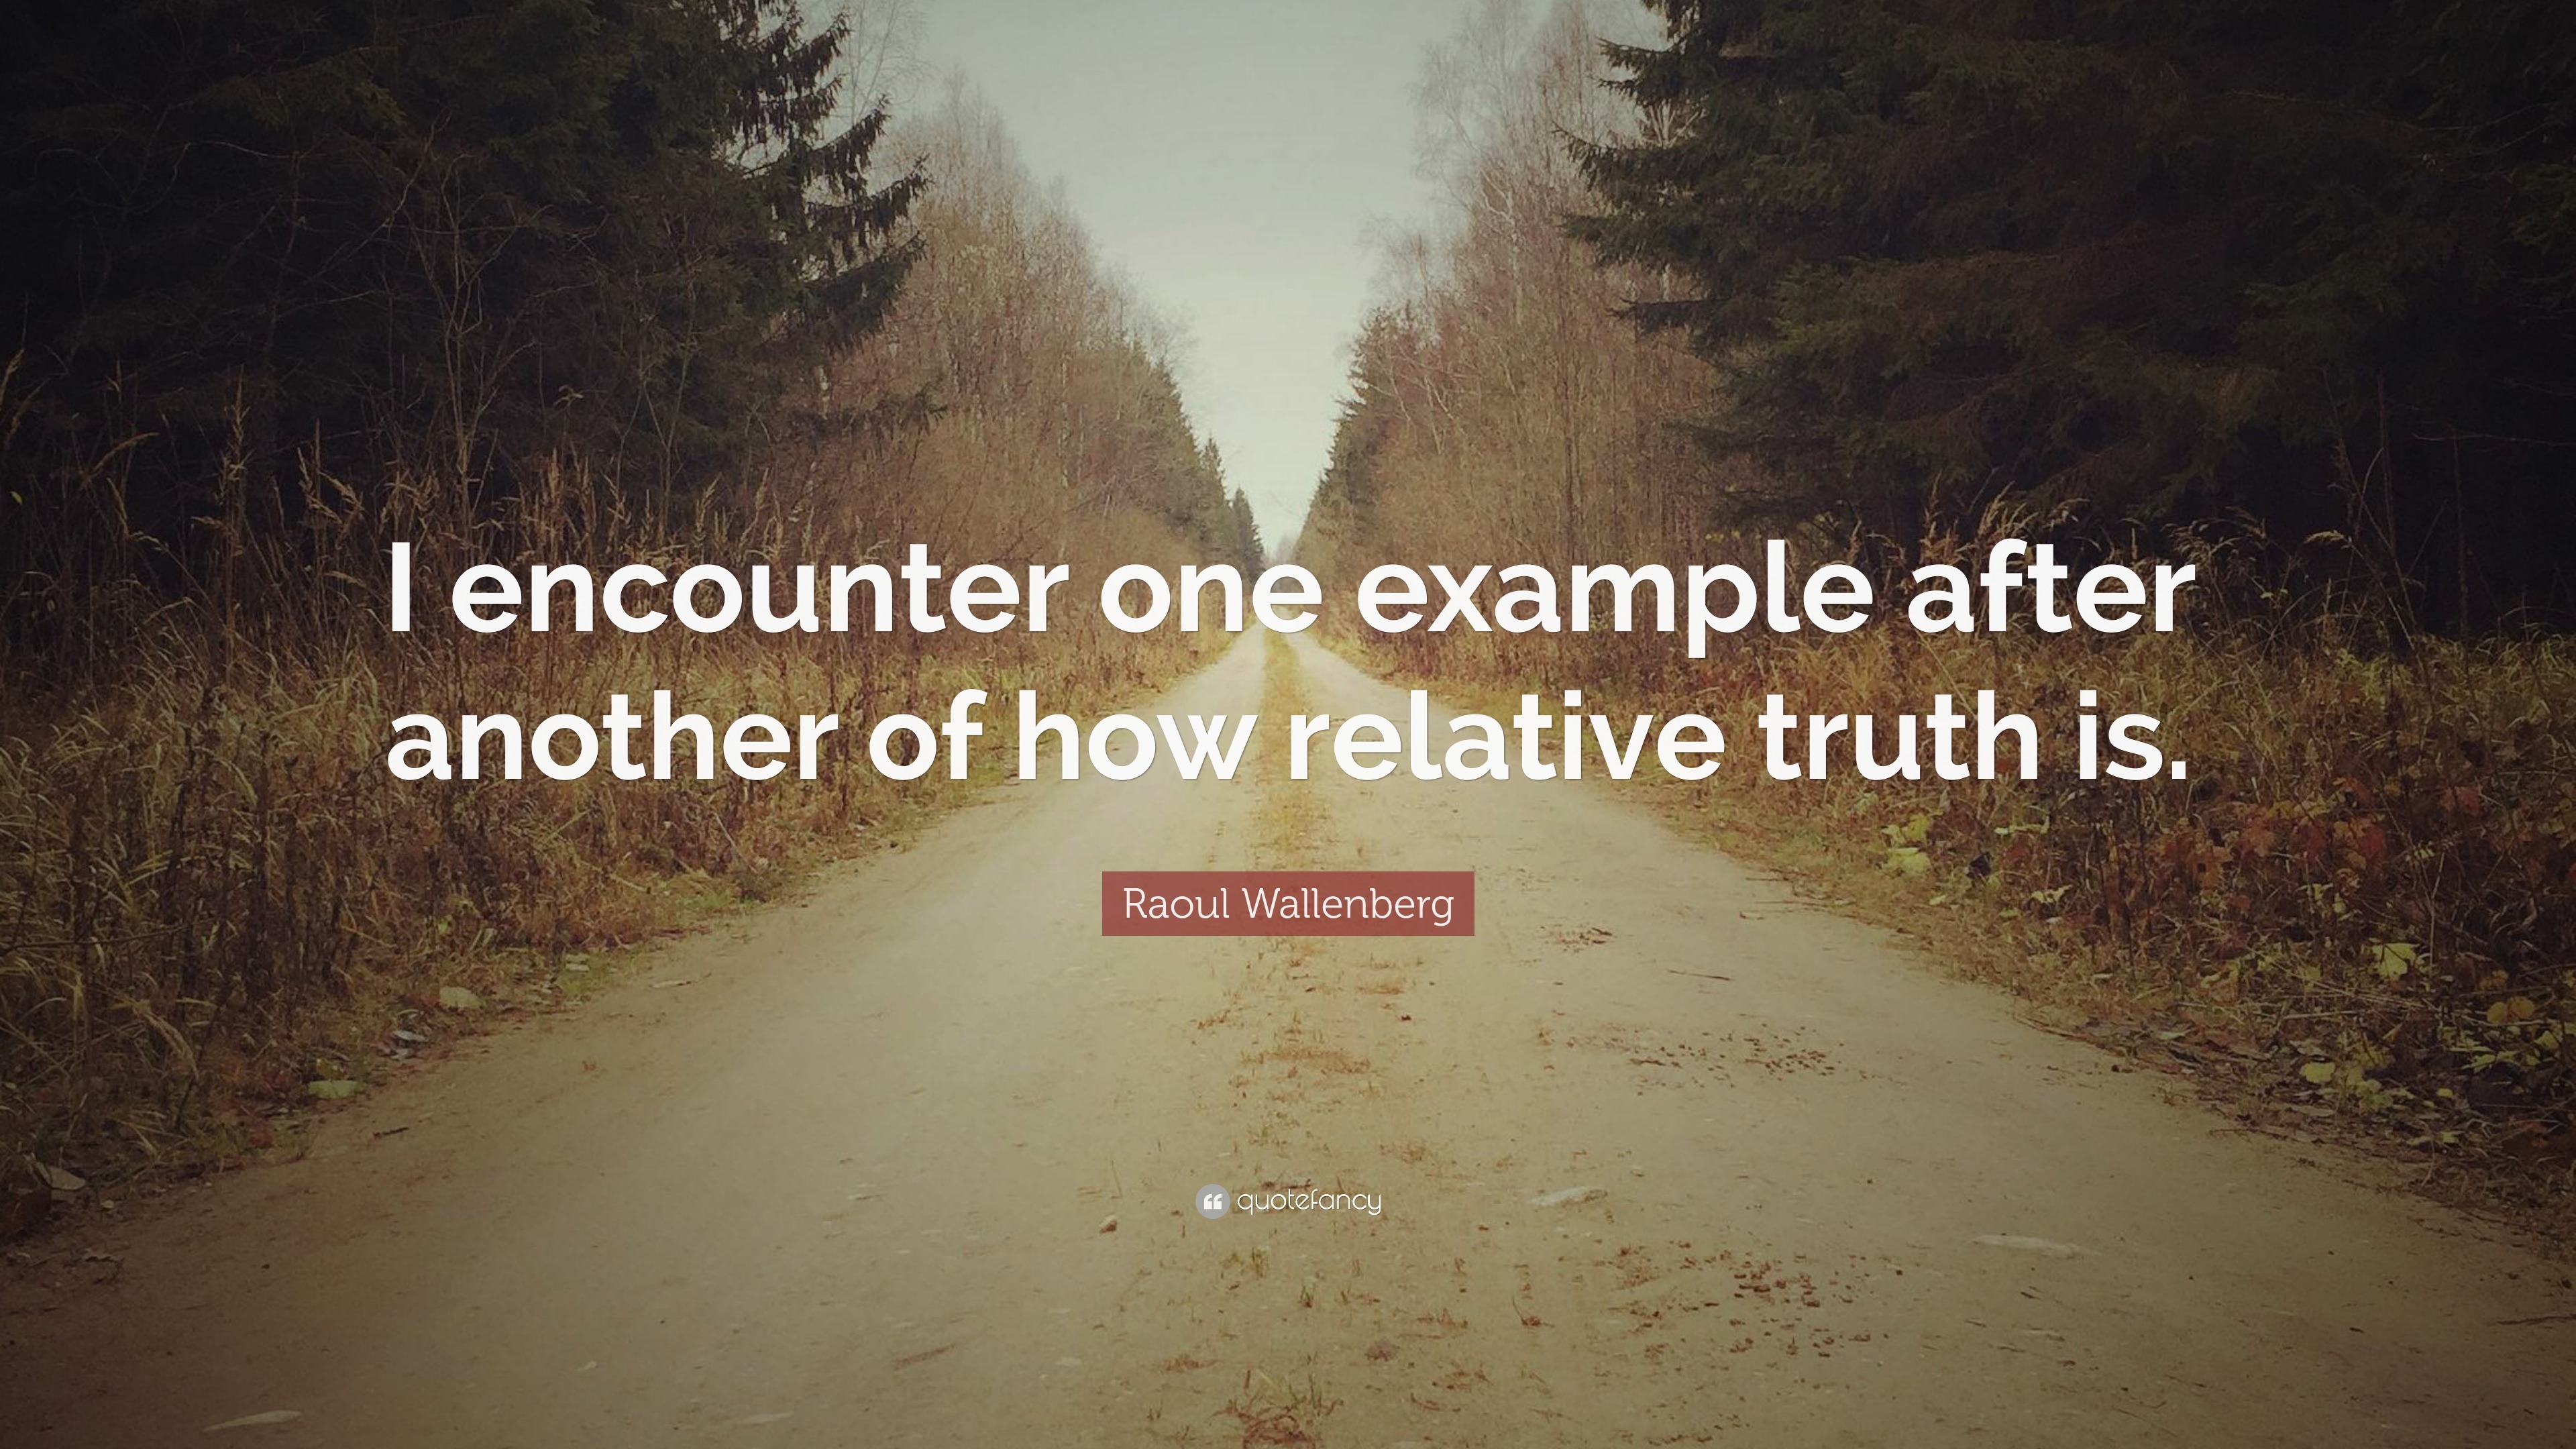 Raoul Wallenberg Quote: “I encounter one example after another of how